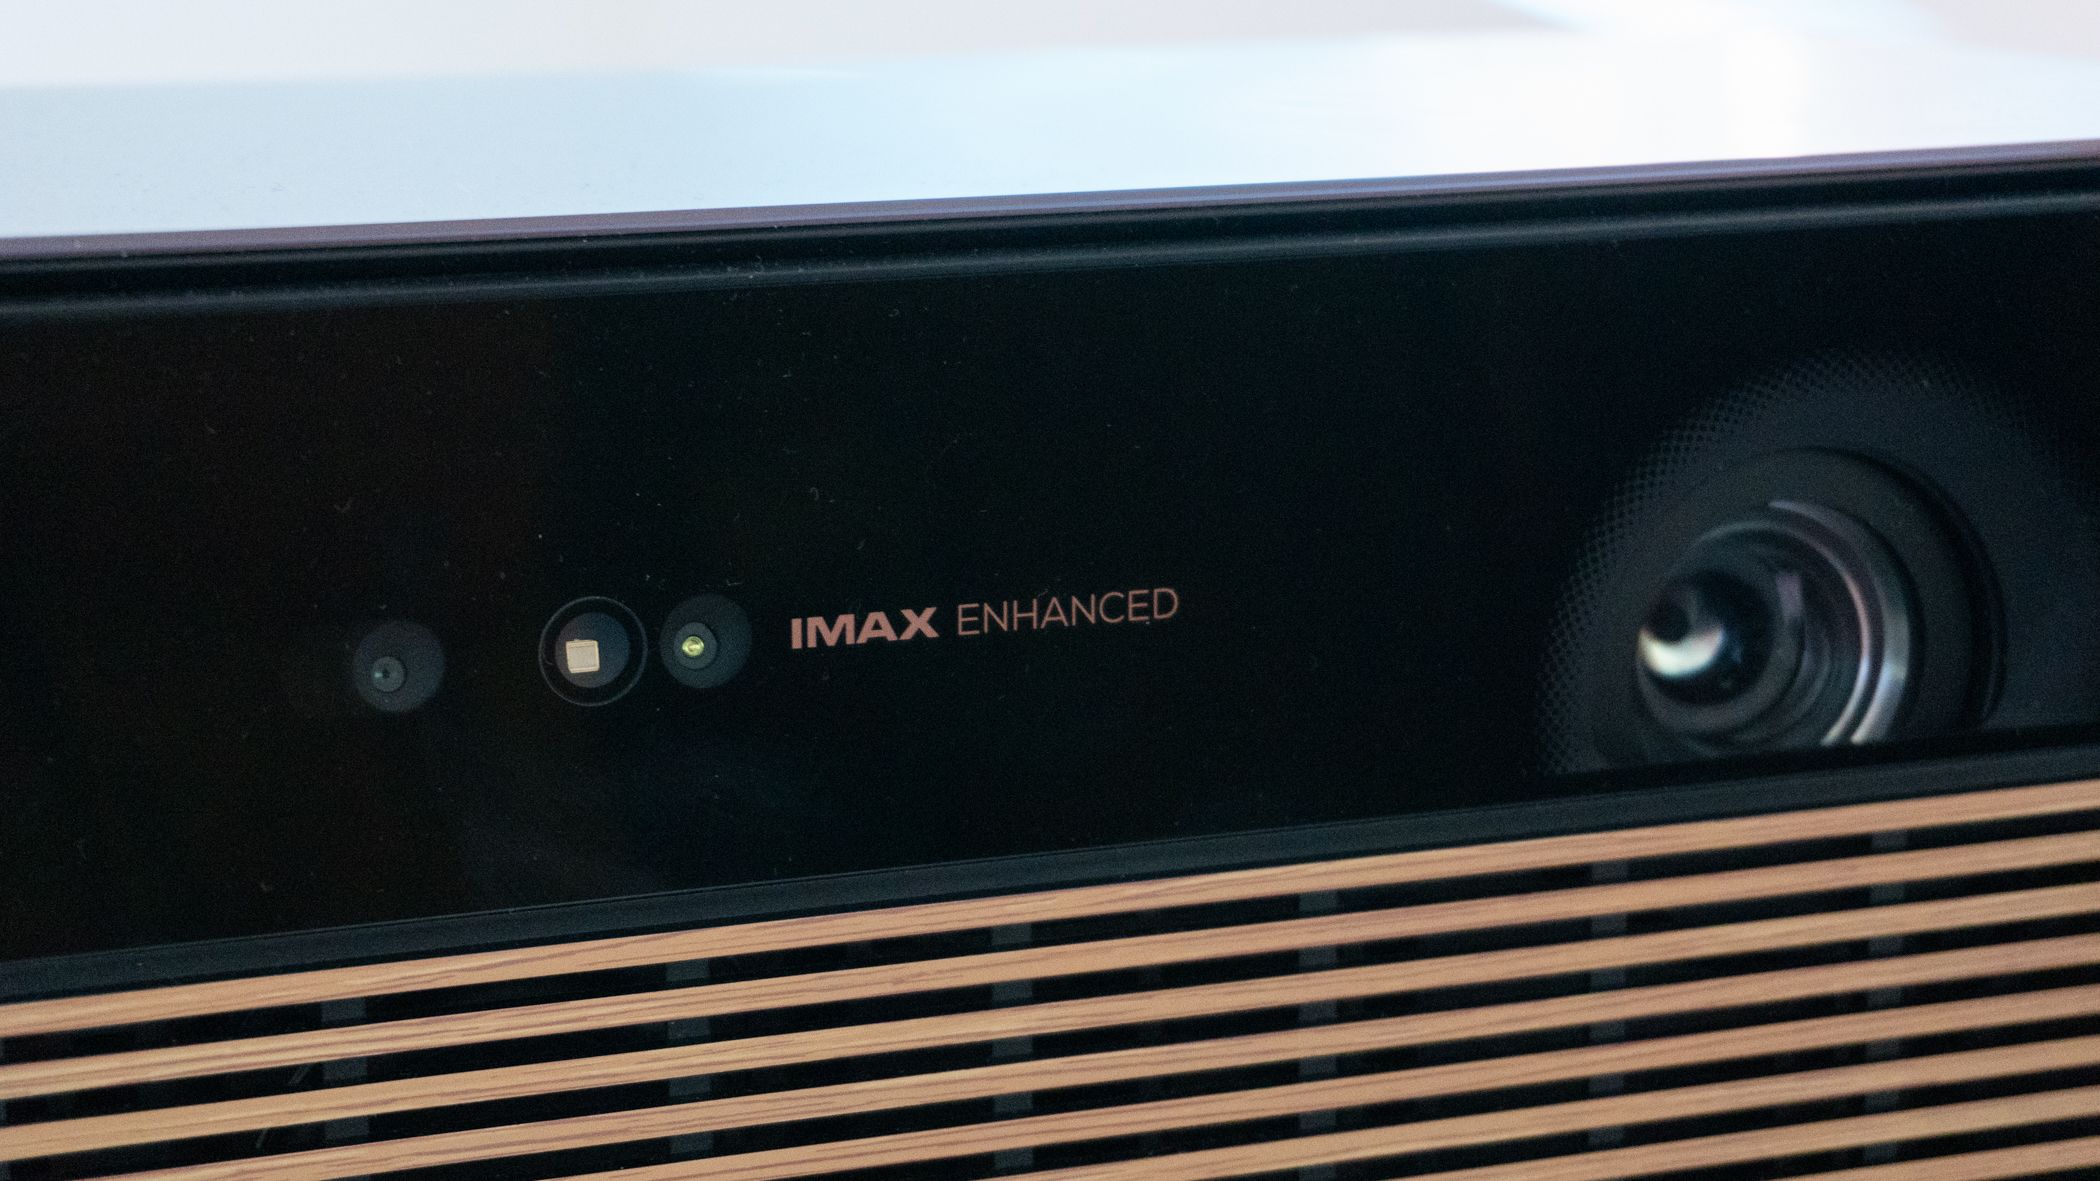 Xgimi Horizon Max debuts at CES with IMAX